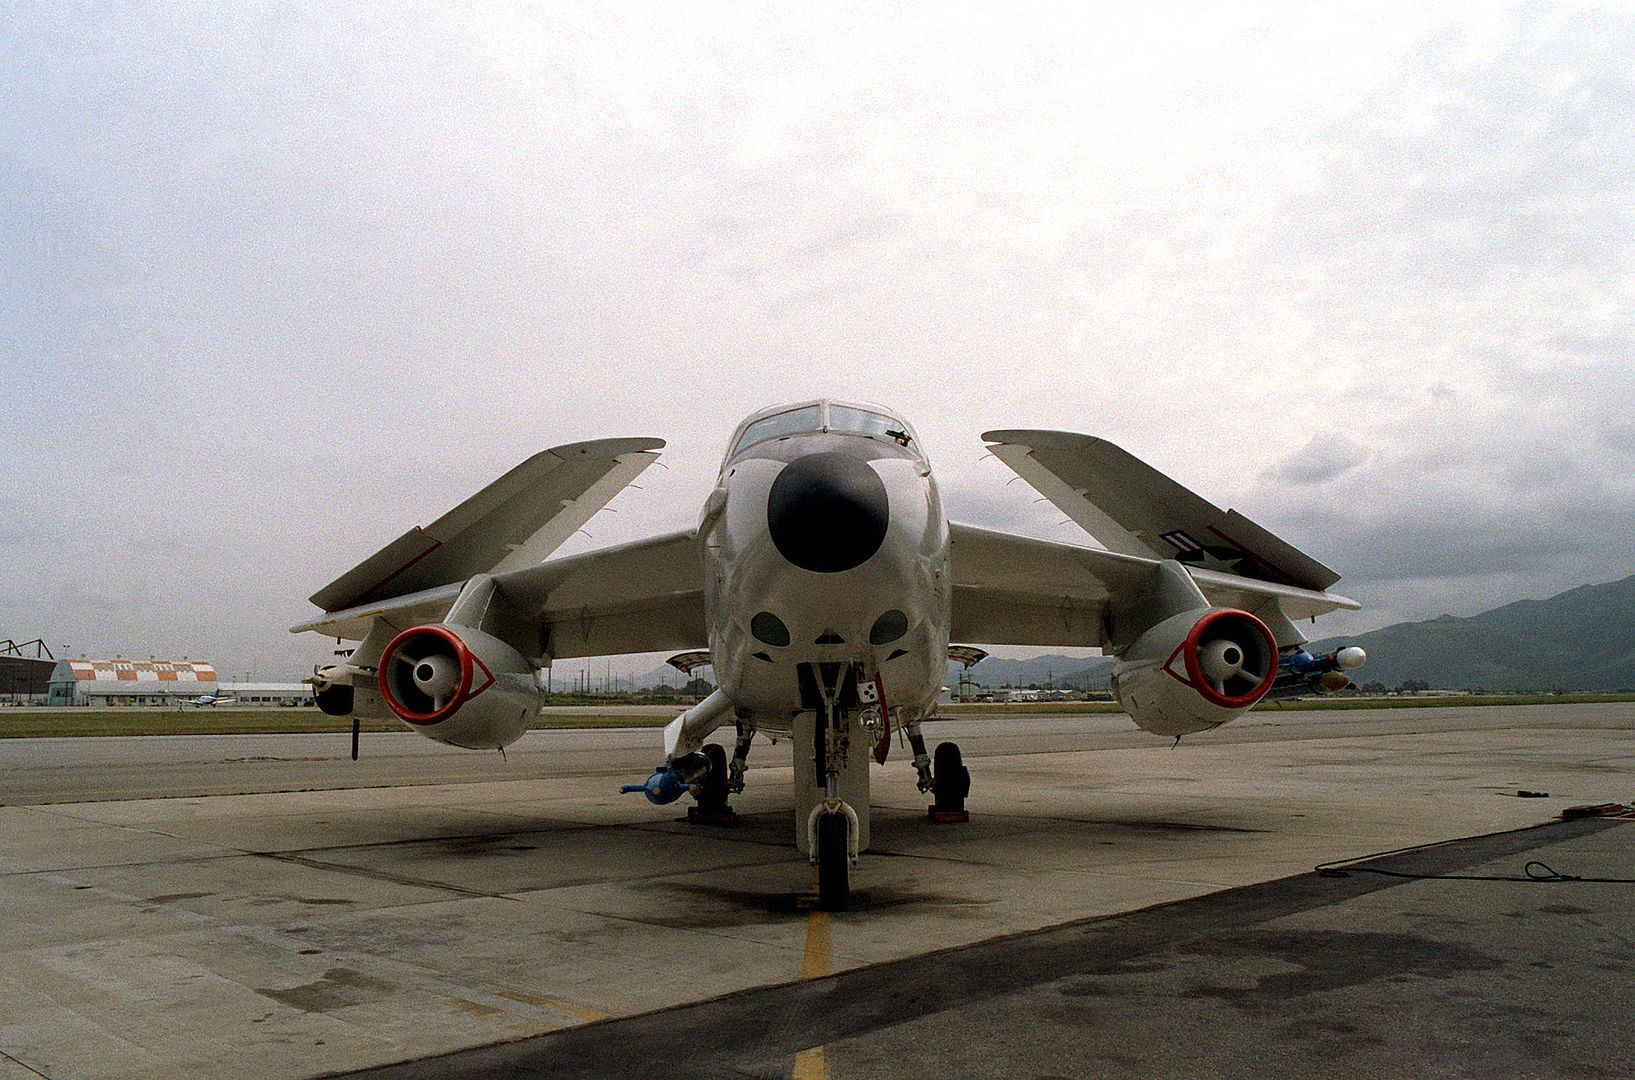 3 Skywarrior Aircraft Equipped With Electronic Warfare Pods With Its Wings Folded Up At The Pacific Missile Test Center